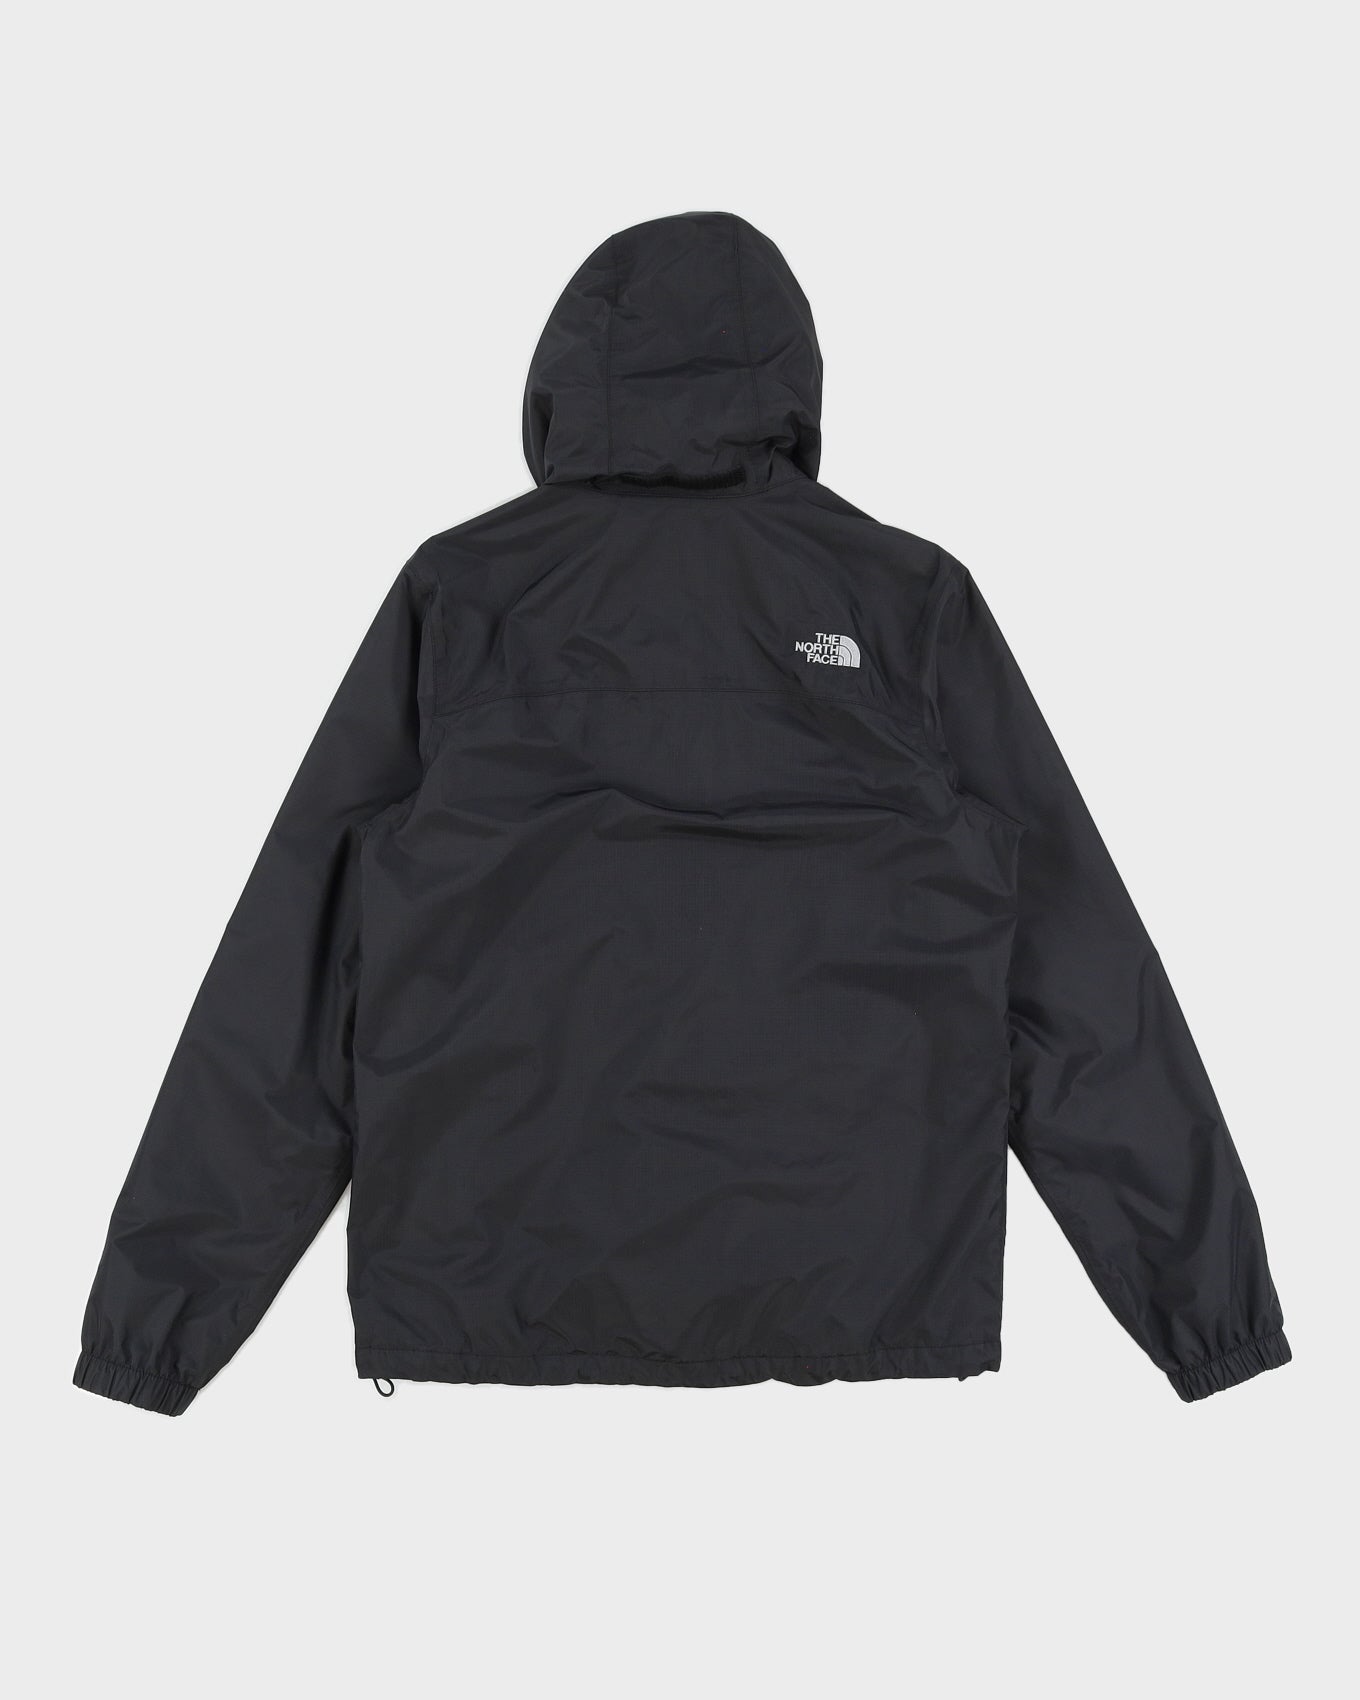 The North Face Black DryVent Hooded Jacket - S